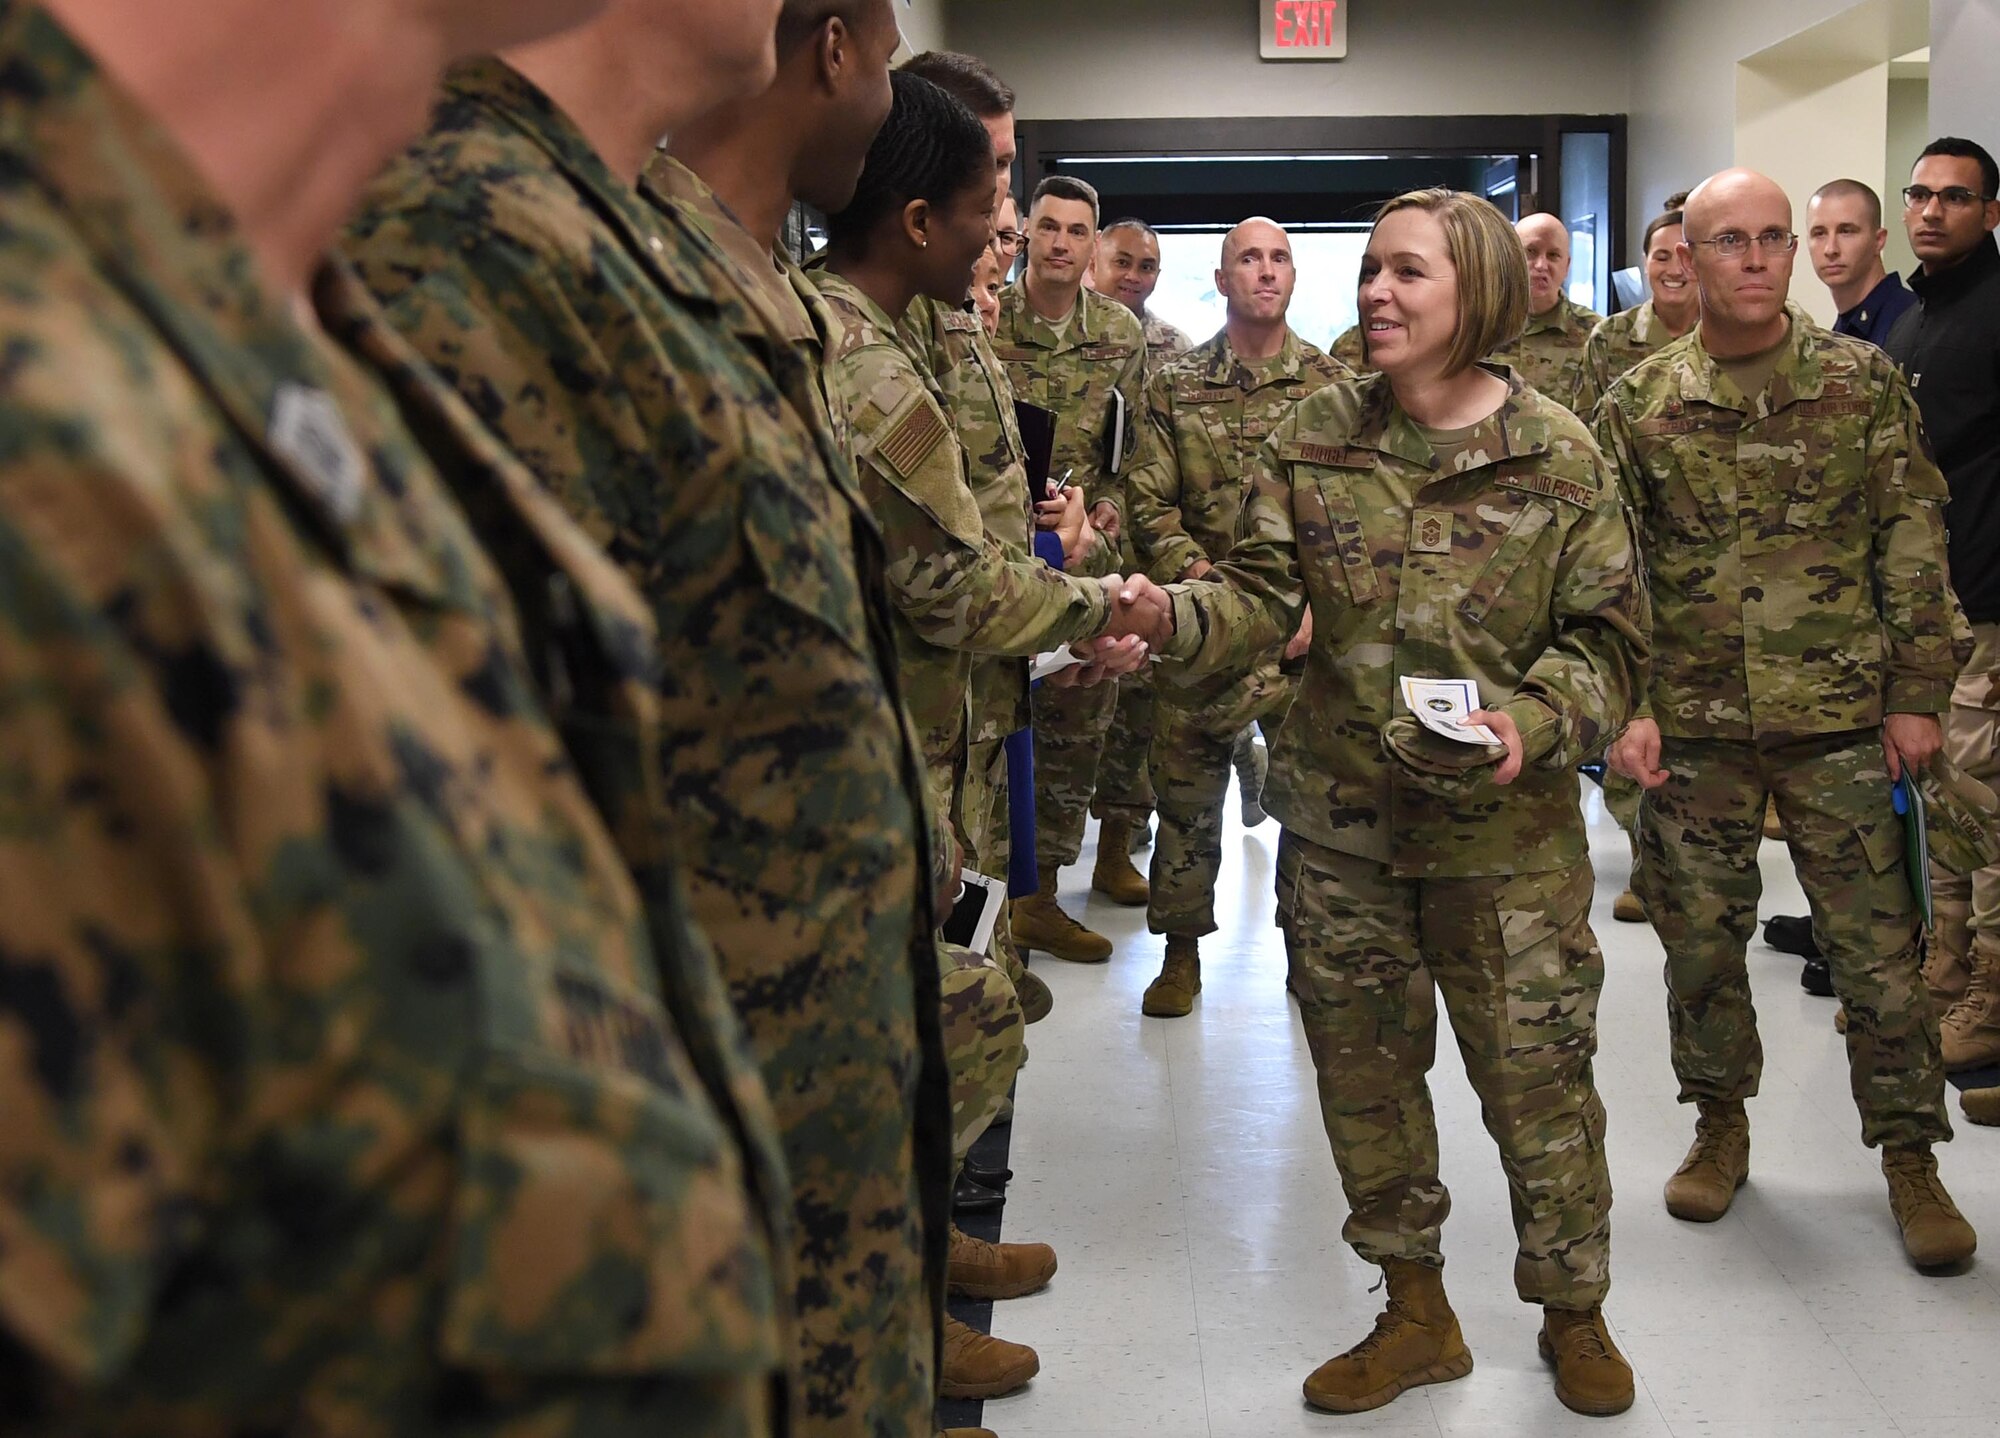 U.S. Air Force Chief Master Sgt. Julie Gudgel, command chief of Air Education and Training Command, introduces herself to 335th Training Squadron personnel during an immersion tour inside the Joint
Weather Training Facility at Keesler Air Force Base, Mississippi, Jan. 30, 2020. Gudgel joined Lt. Gen. Brad Webb, commander of AETC, during the visit to Keesler in order to become more familiar with the mission capabilities of the 81st Training Wing and to view the paradigm shift occurring in the training environment within the 81st Training Group. (U.S. Air Force photo by Kemberly Groue)